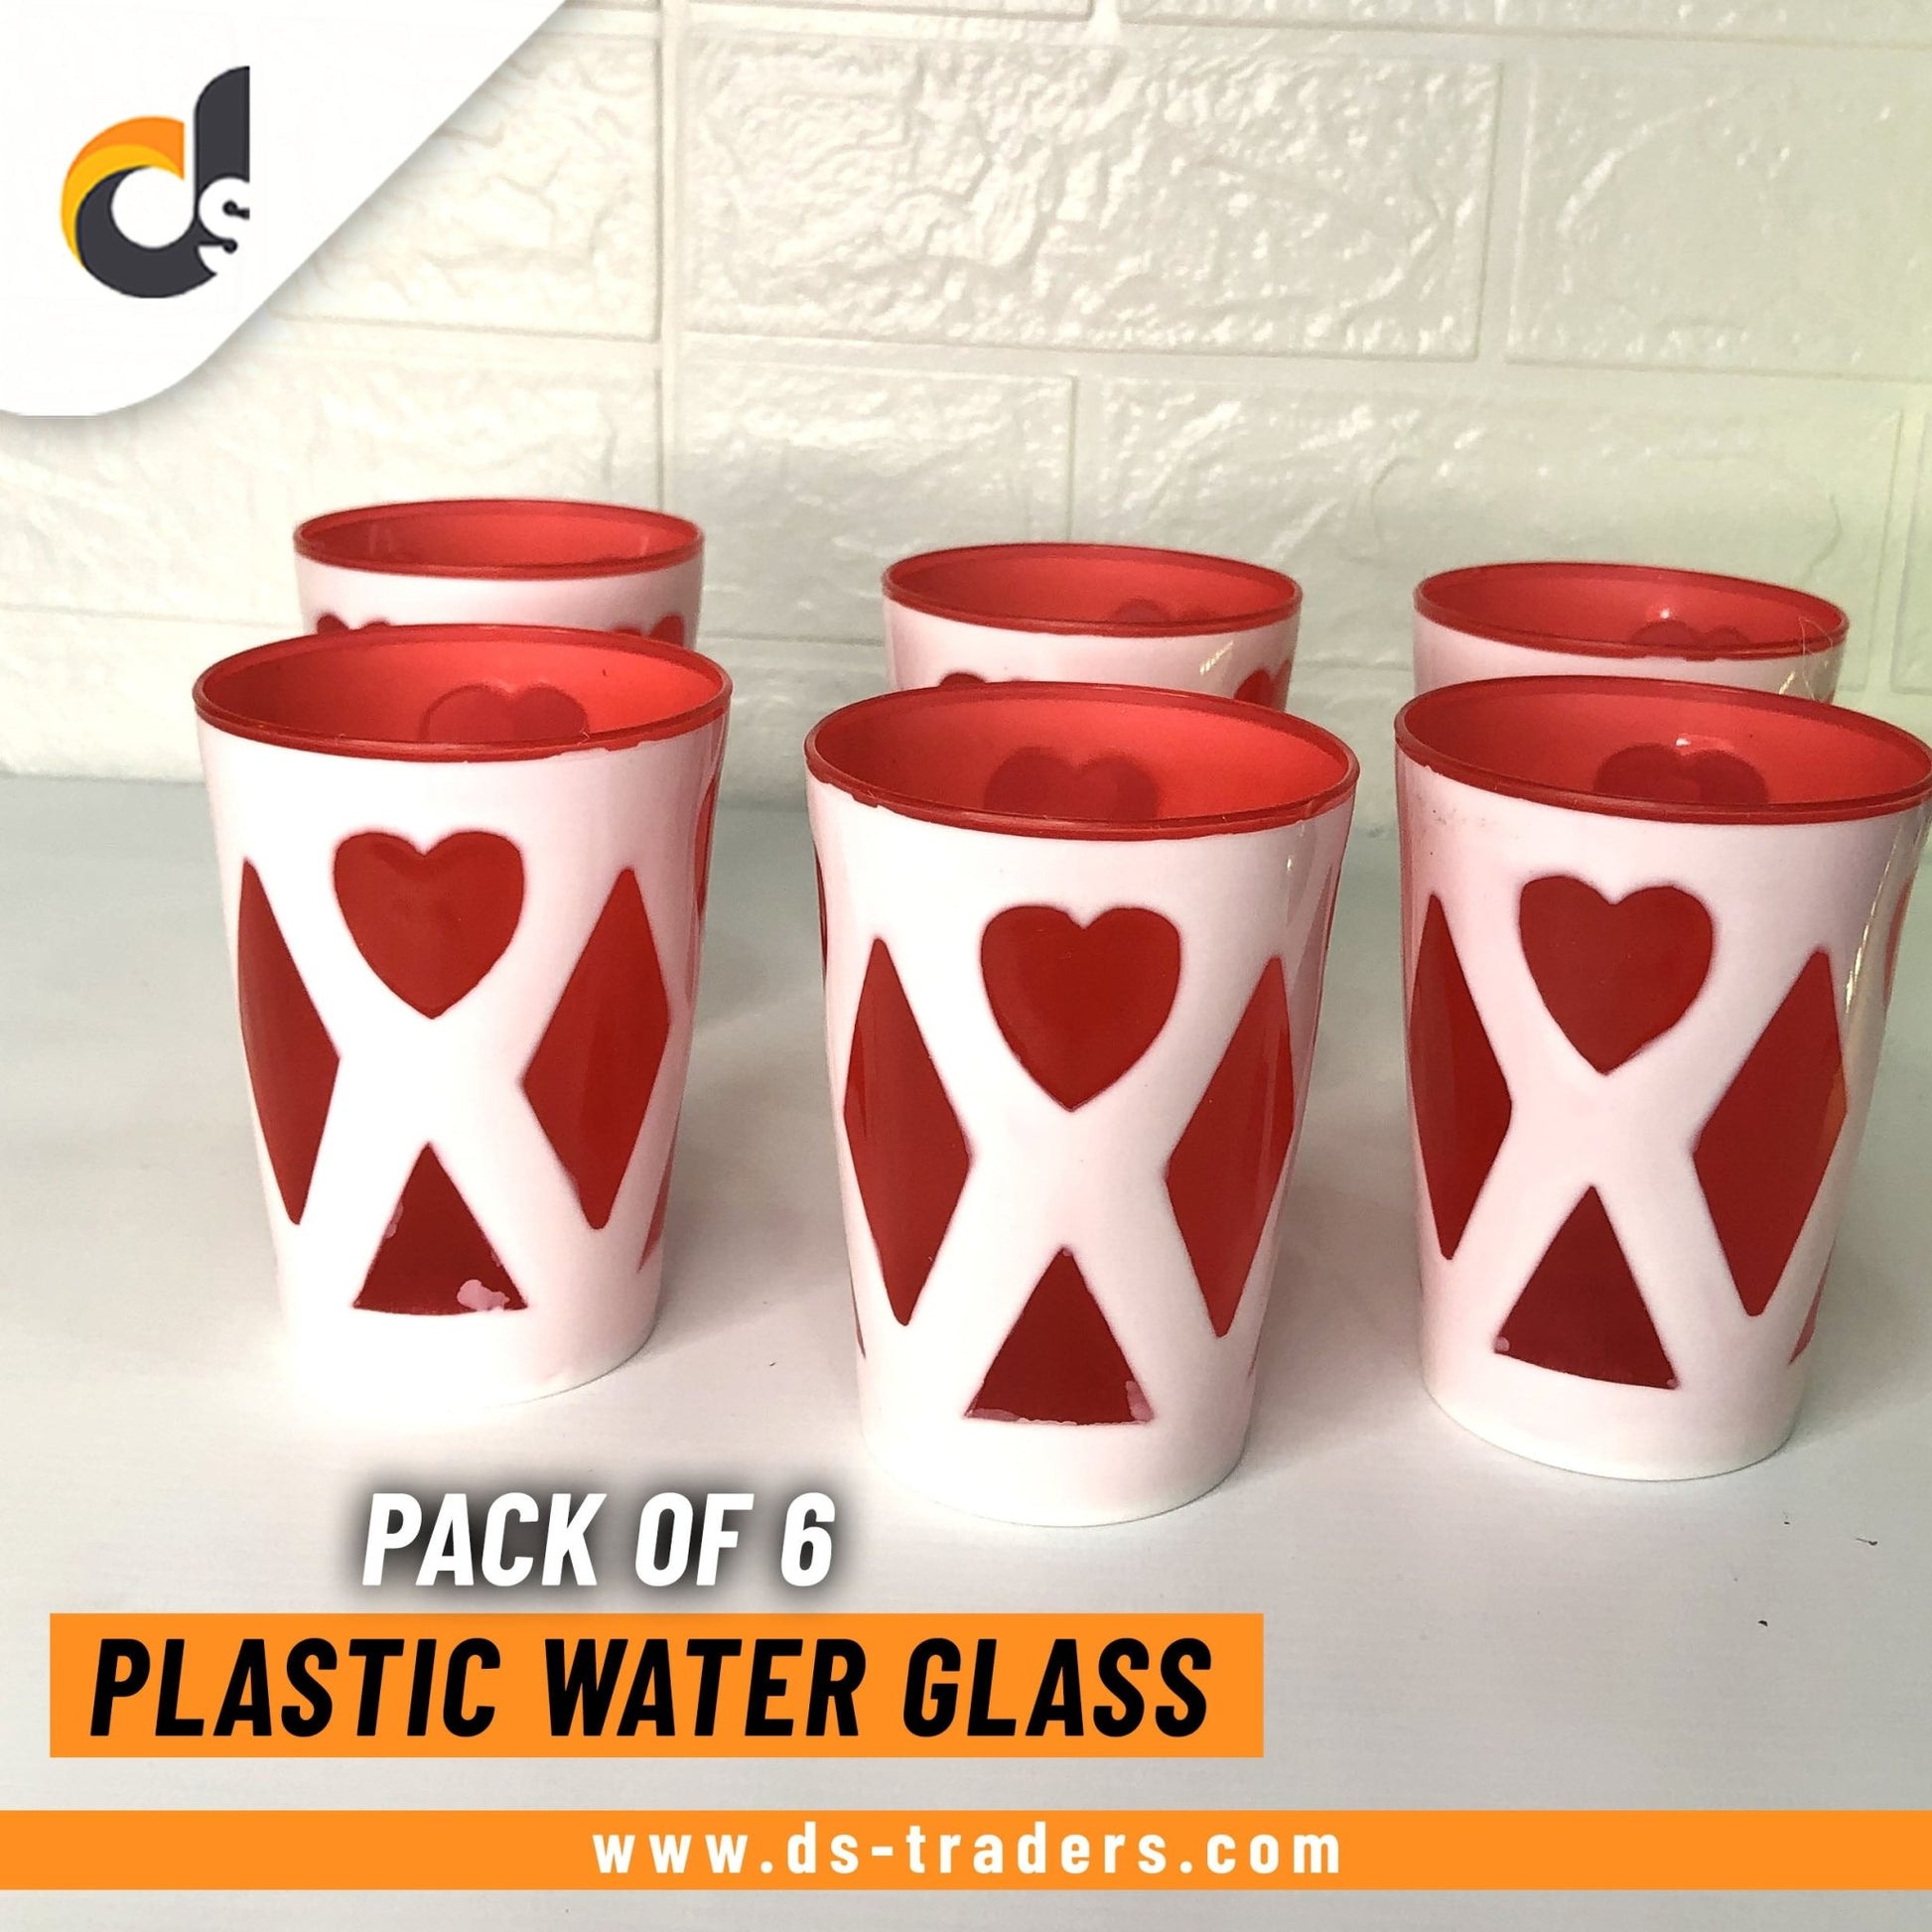 Pack Of 6 - Plastic Water Glass - DS Traders